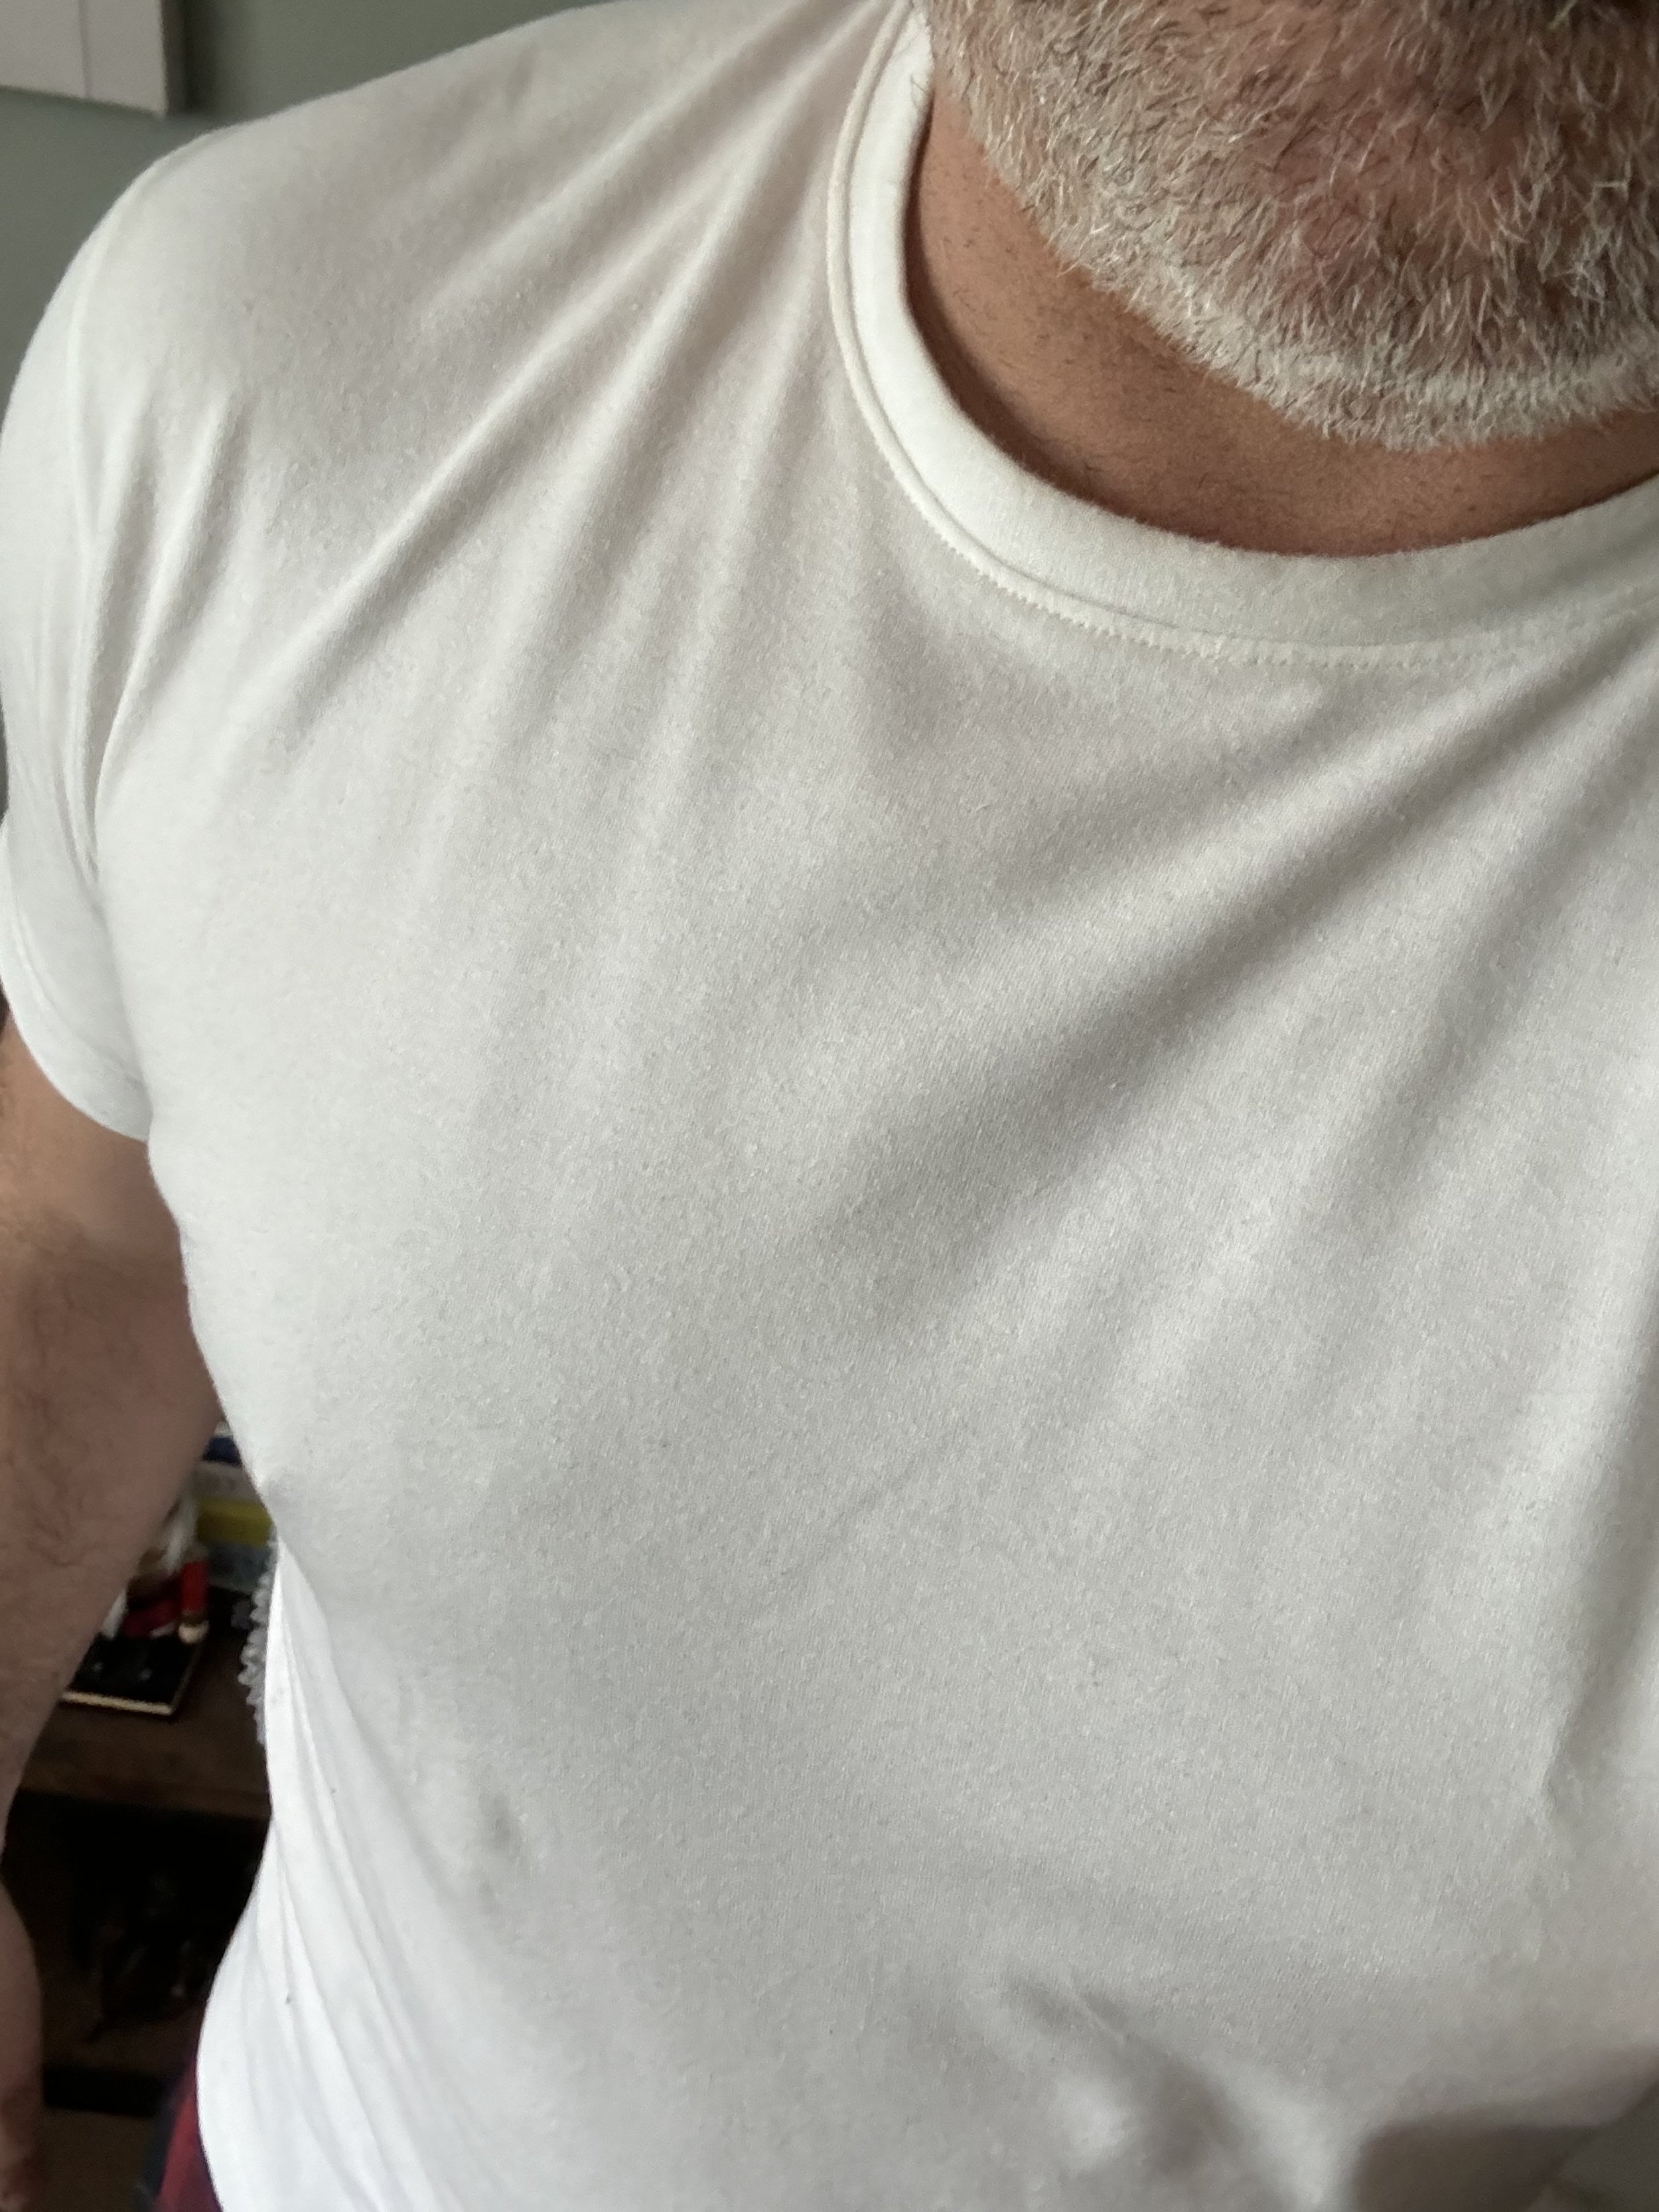 Western Rise X Cotton Tee Review